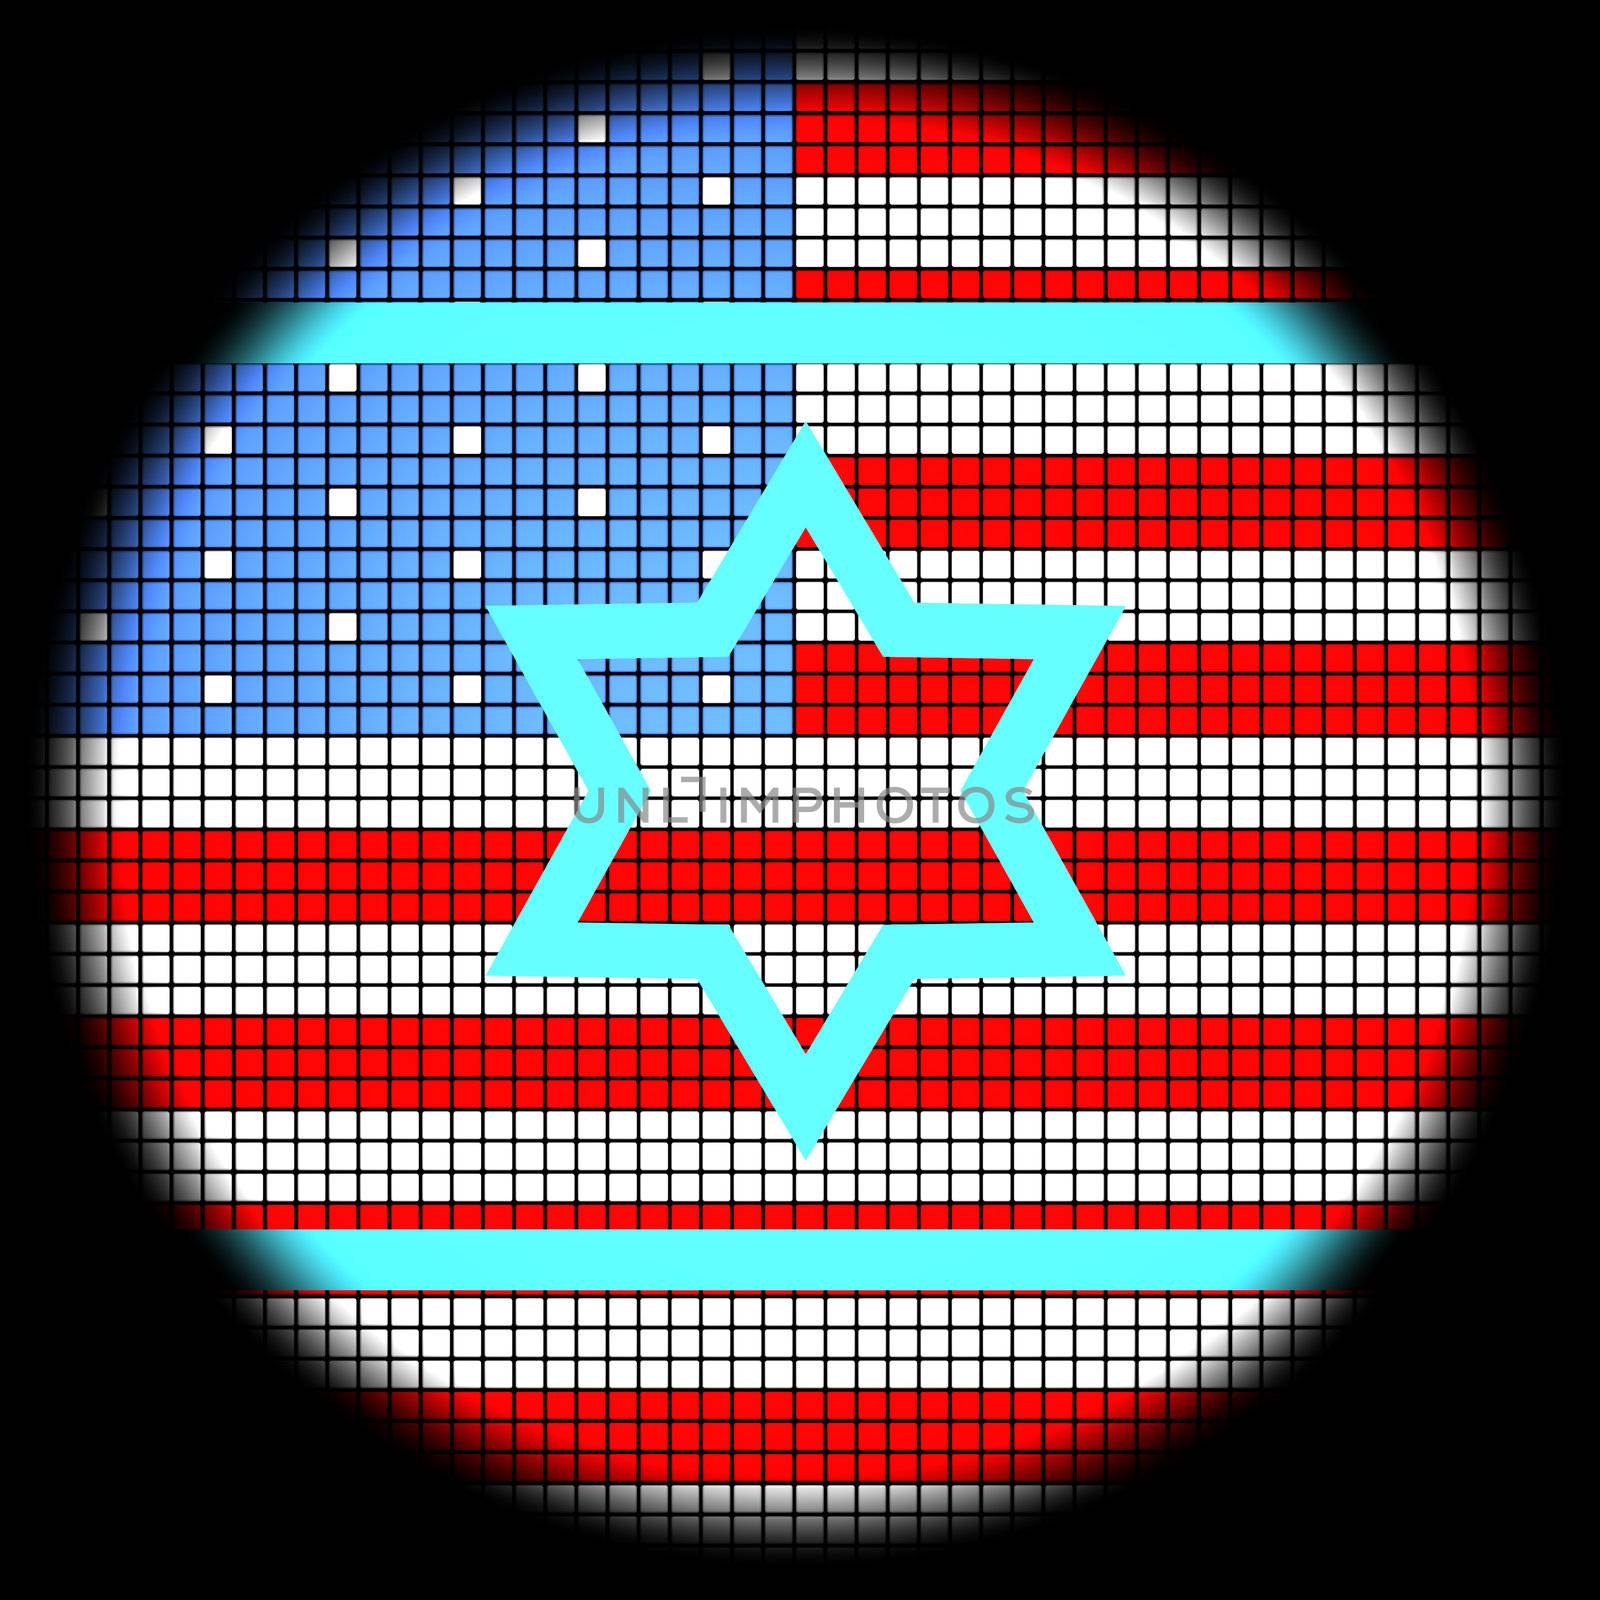 Magen David Icon on American Flag Checkered Background